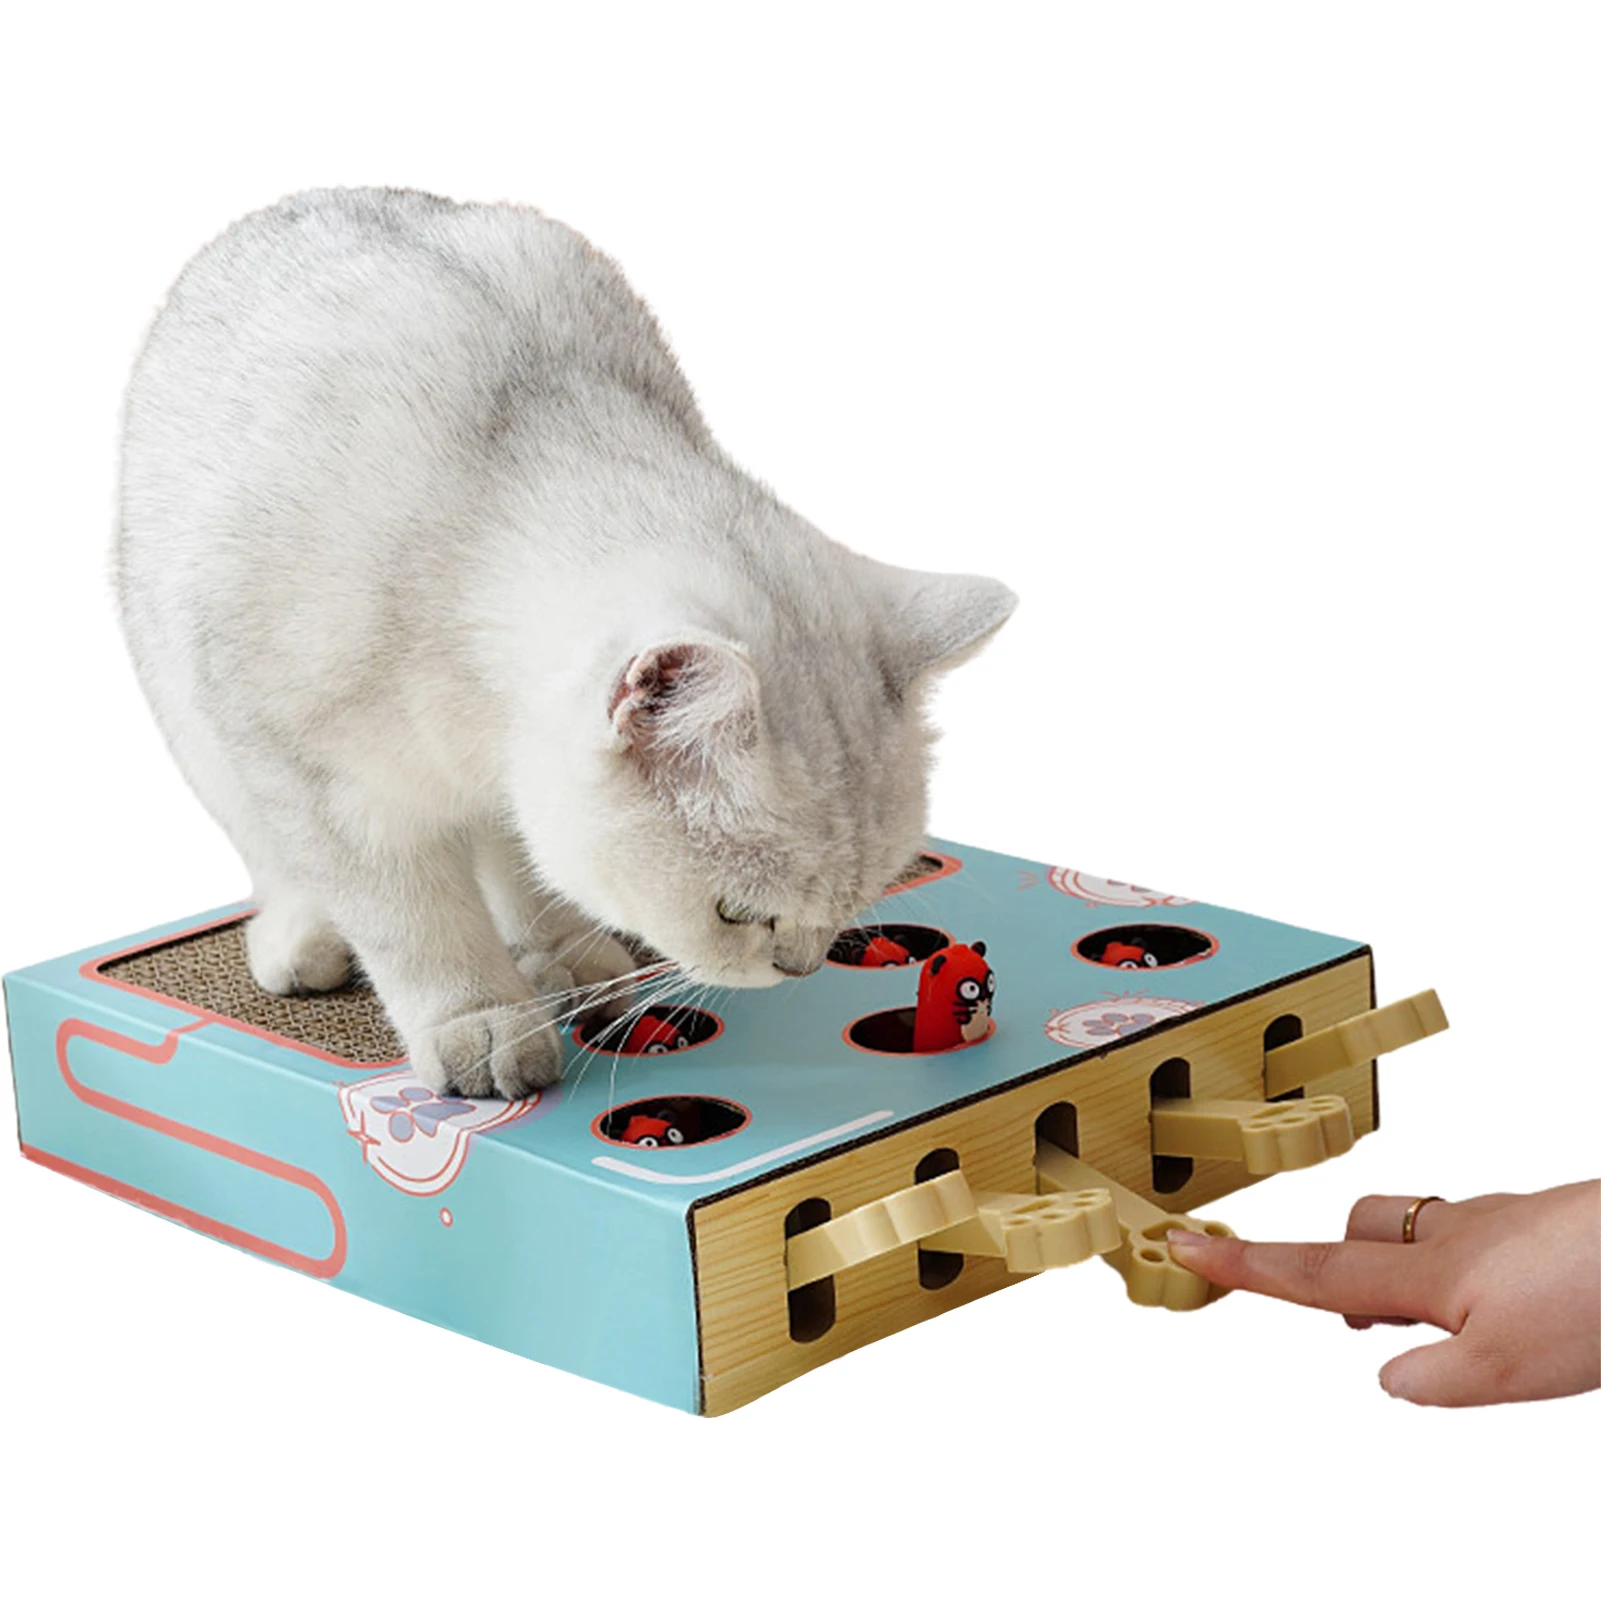 

Cat Scratching Board Whack-a-Mole Cat Toy And 3-in-1 Scratch Pad Made With Corrugated Cardboard 3-in-1 Kitten Interactive Teaser